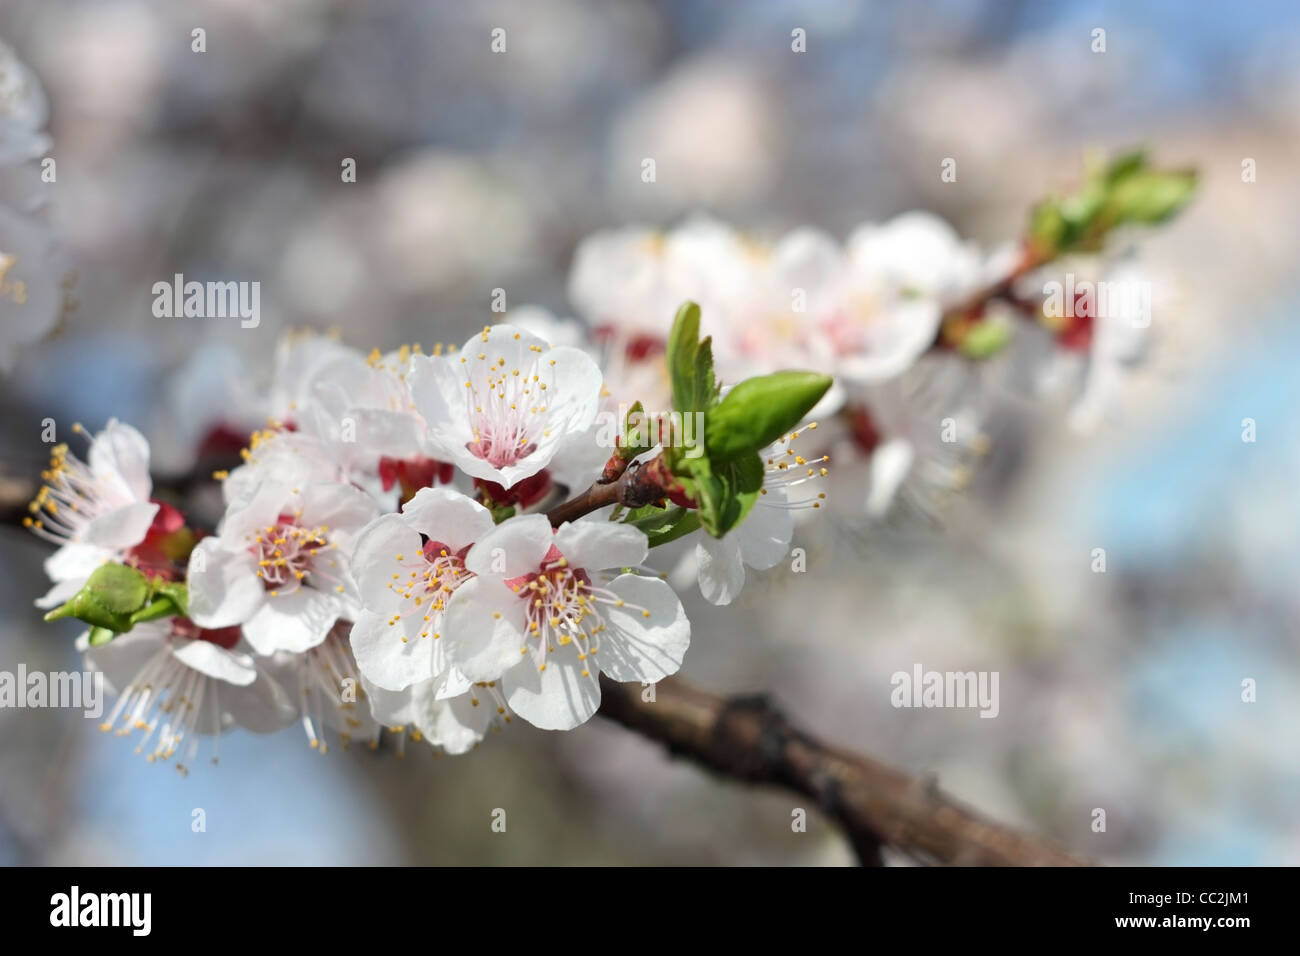 Spring. Branch of apricot blossoms, close-up Stock Photo